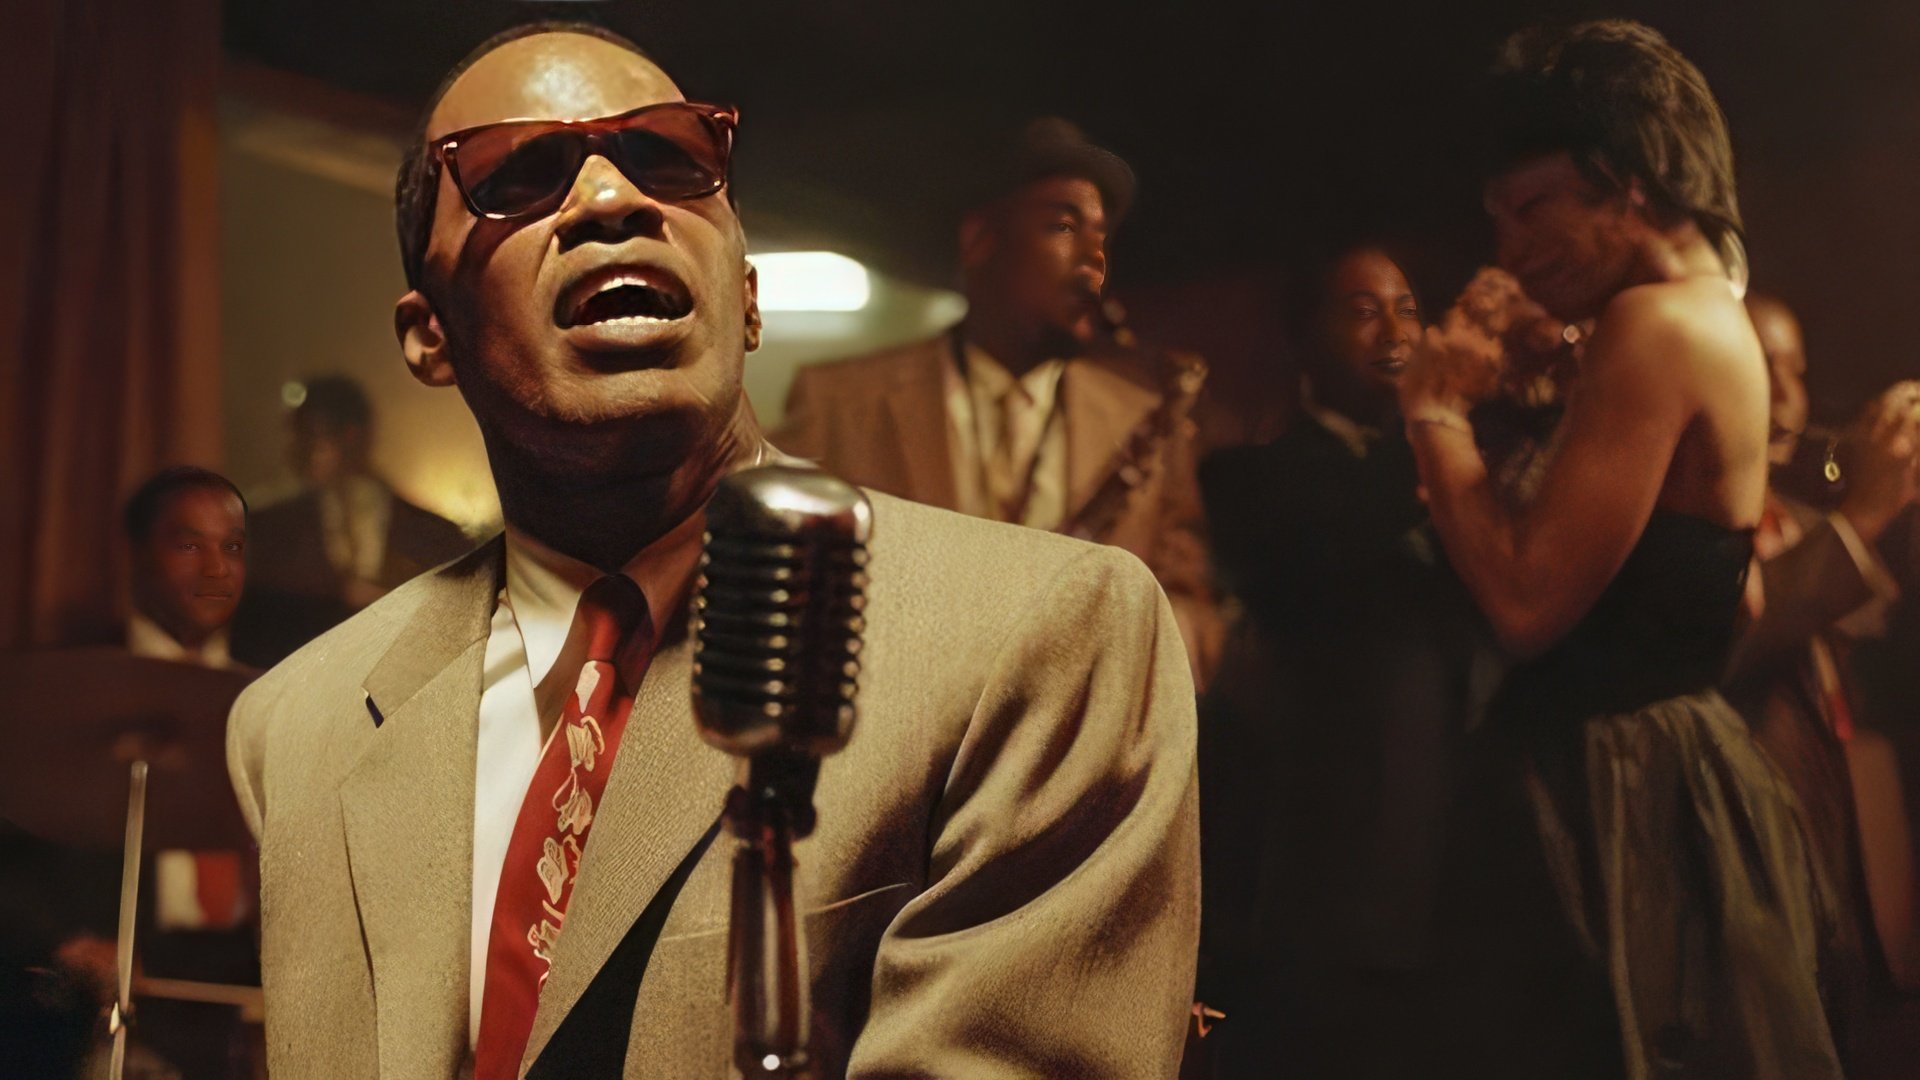 Jamie Foxx received an Academy Award for his portrayal of Ray Charles in Ray